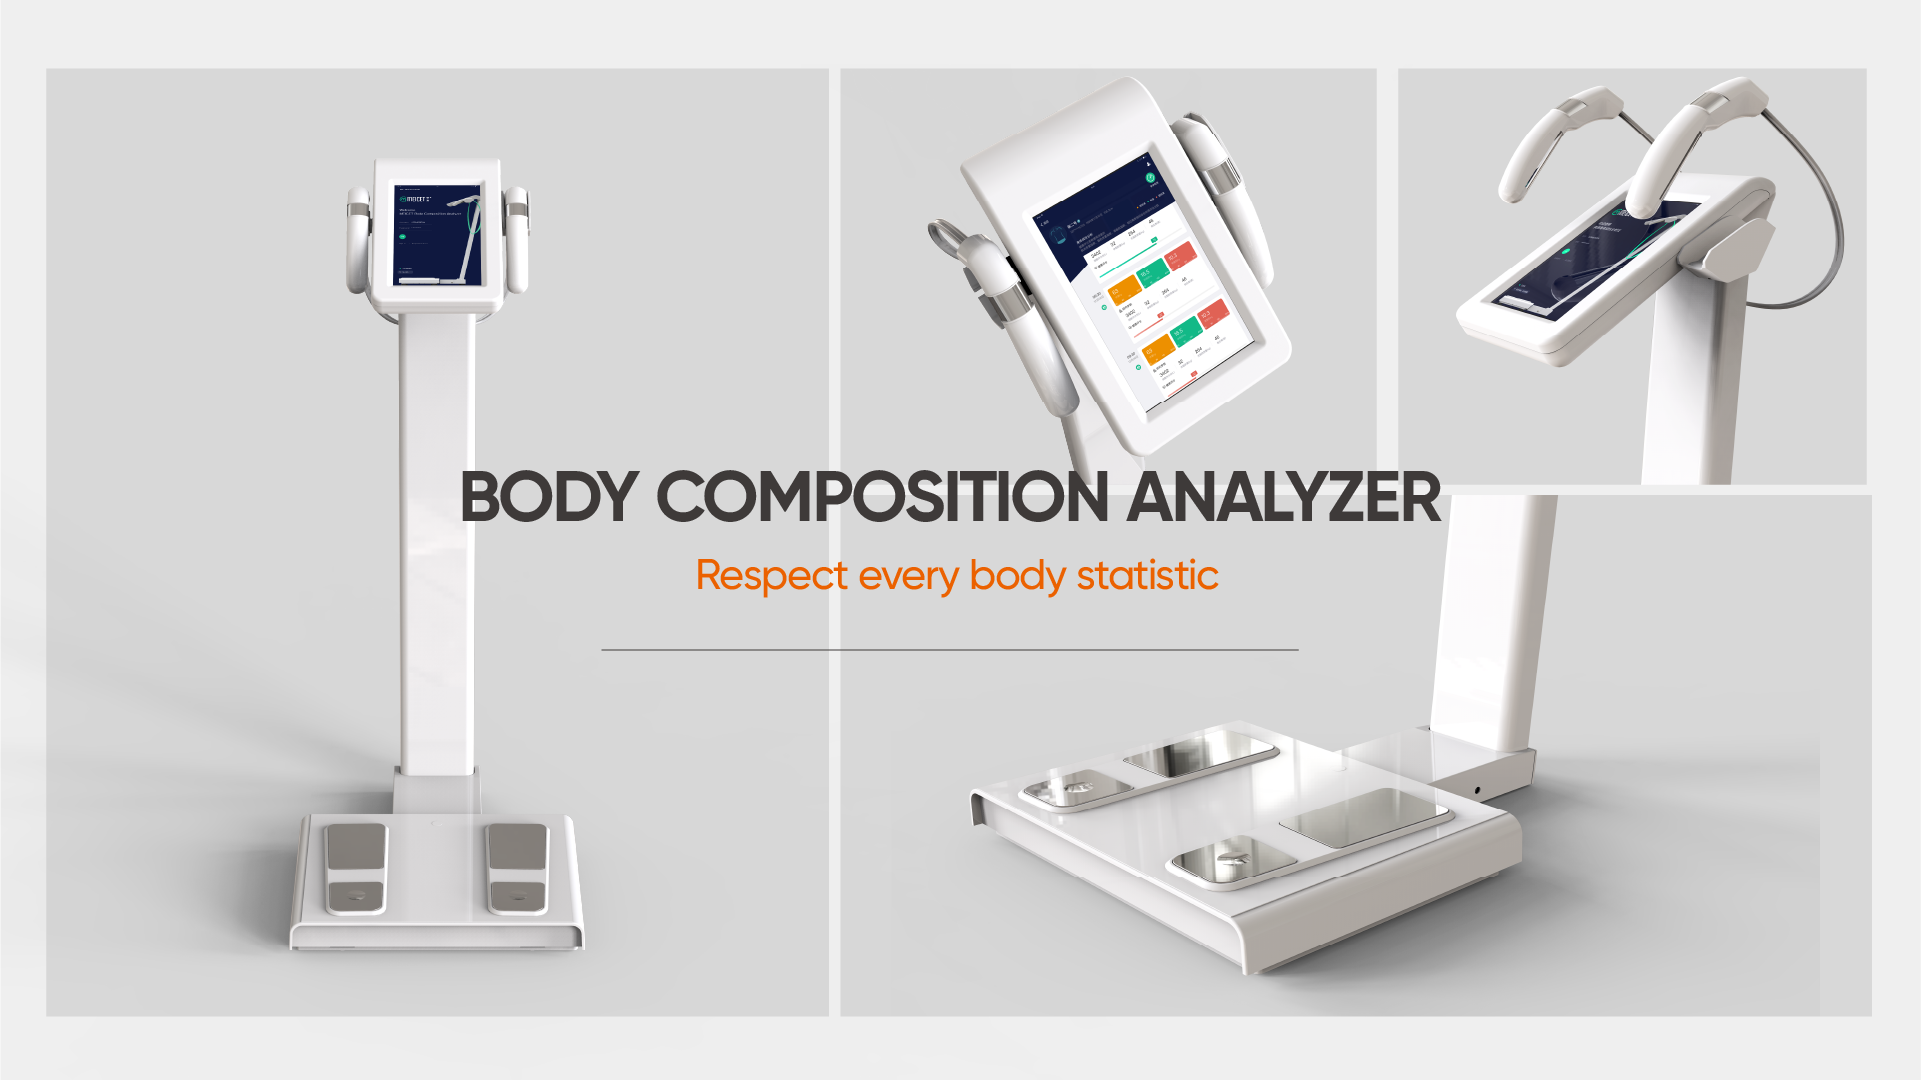 Meicet  China BCA Bioelectrical Impedance Body Composition Analyzer Meicet  BCA100 Manufacture and Factory